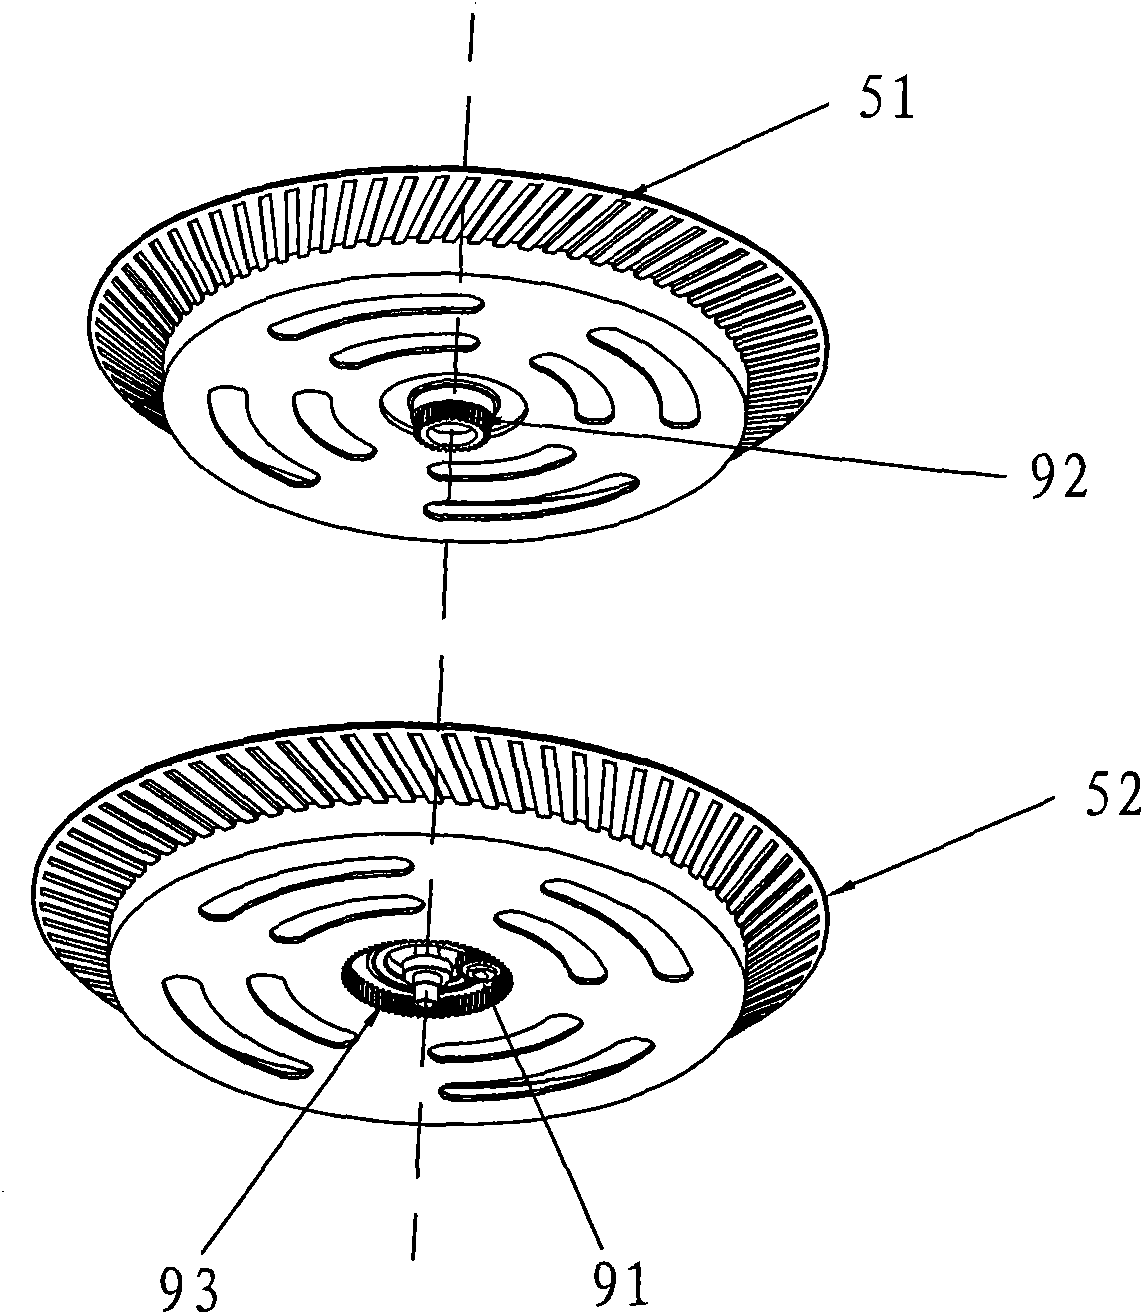 Imaging device for simulating flame